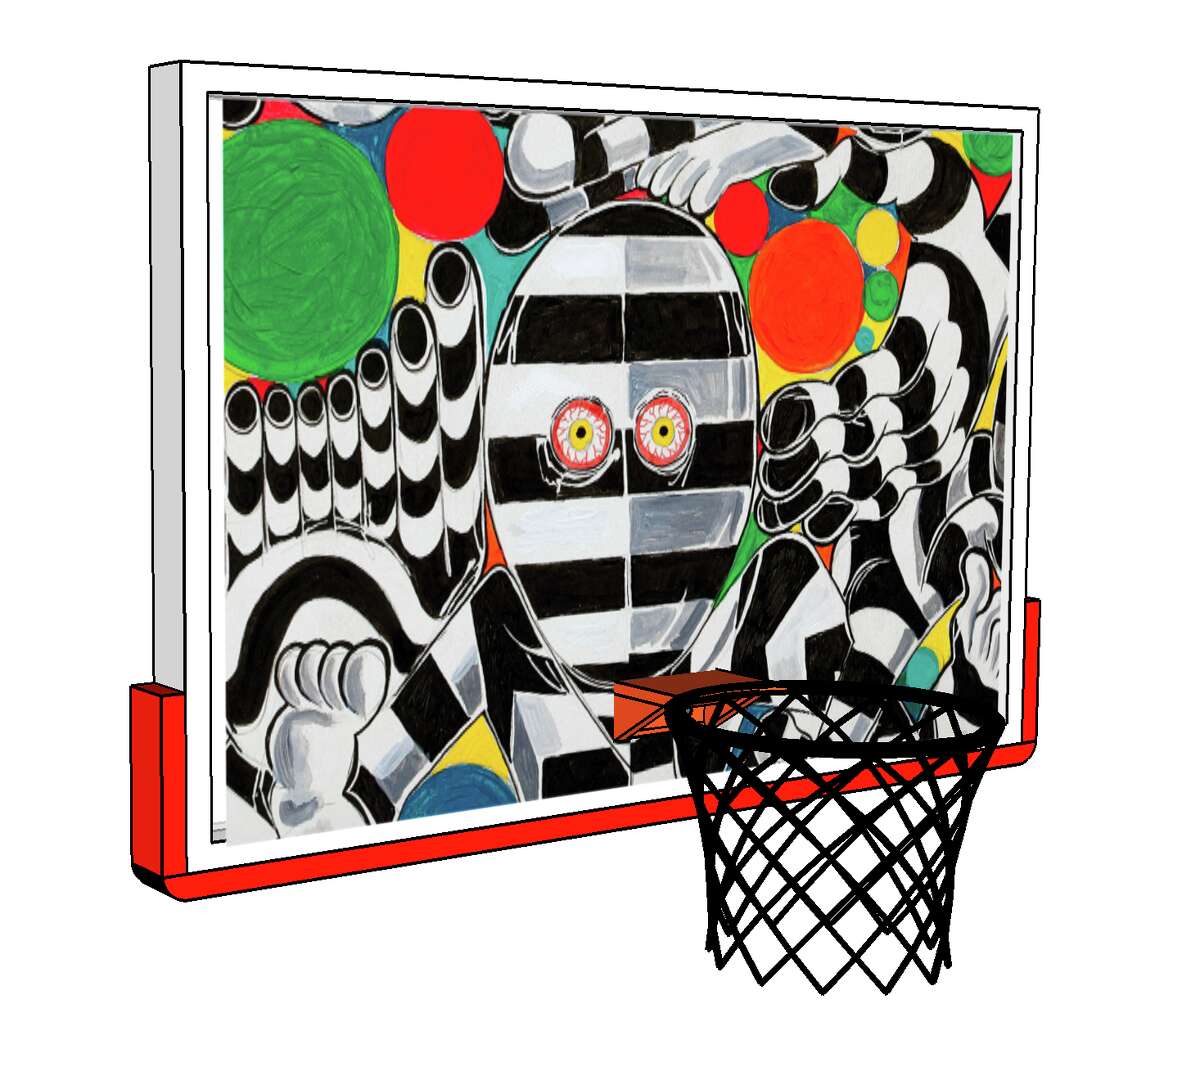 Houston-based artist Trenton Doyle Hancock has designed the backboards, basketball, court, and special rules for CAMH's surrealistic, playable basketball court.